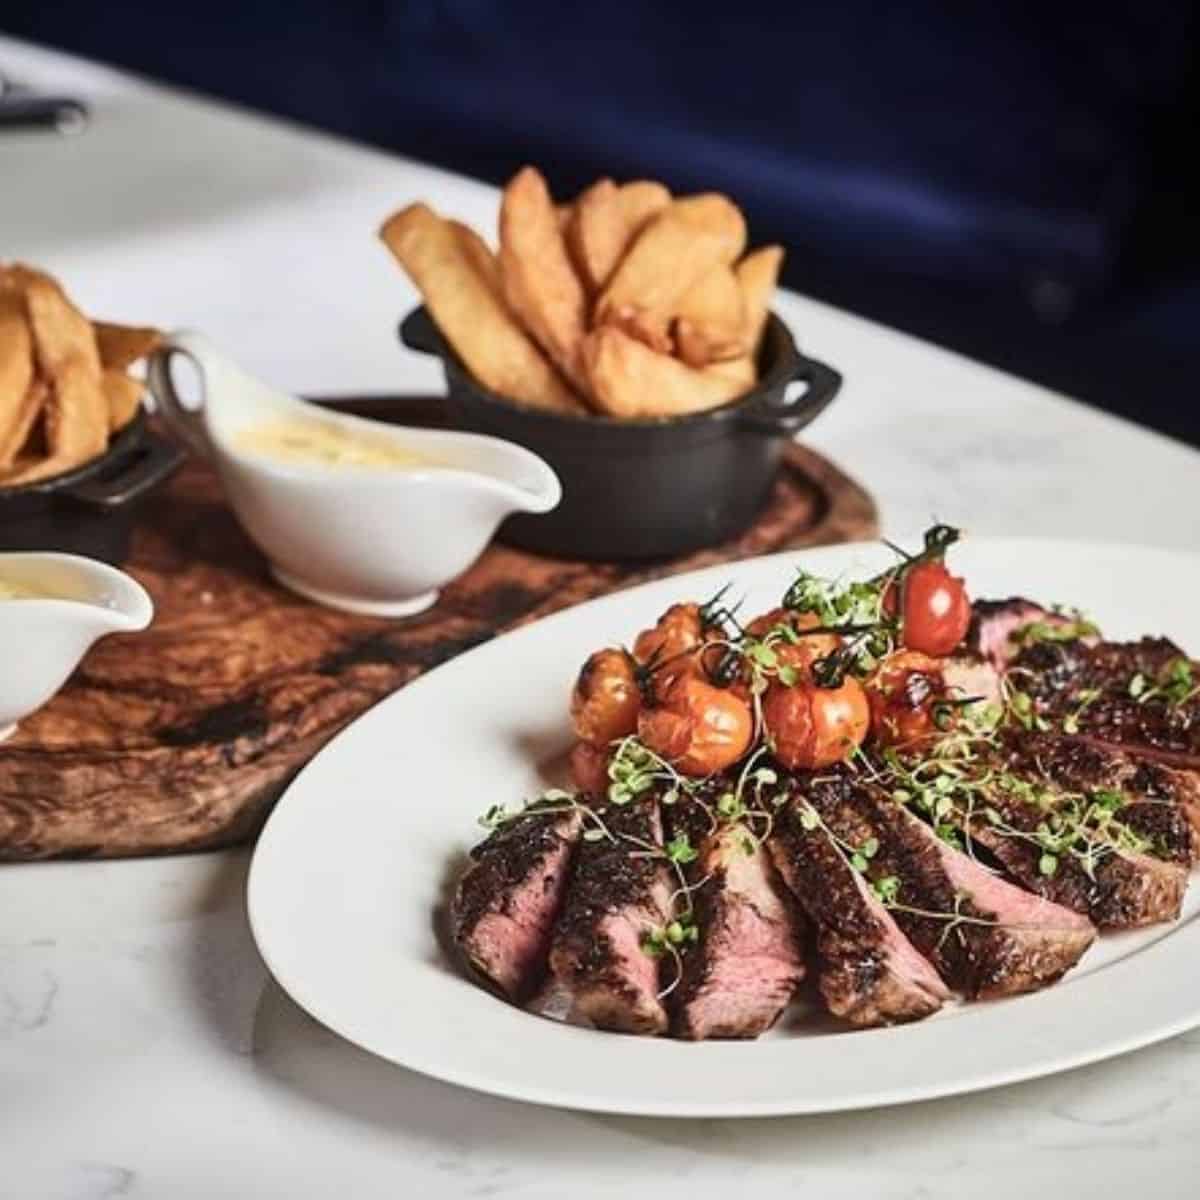 12oz fillet steak with tomatoes and chips